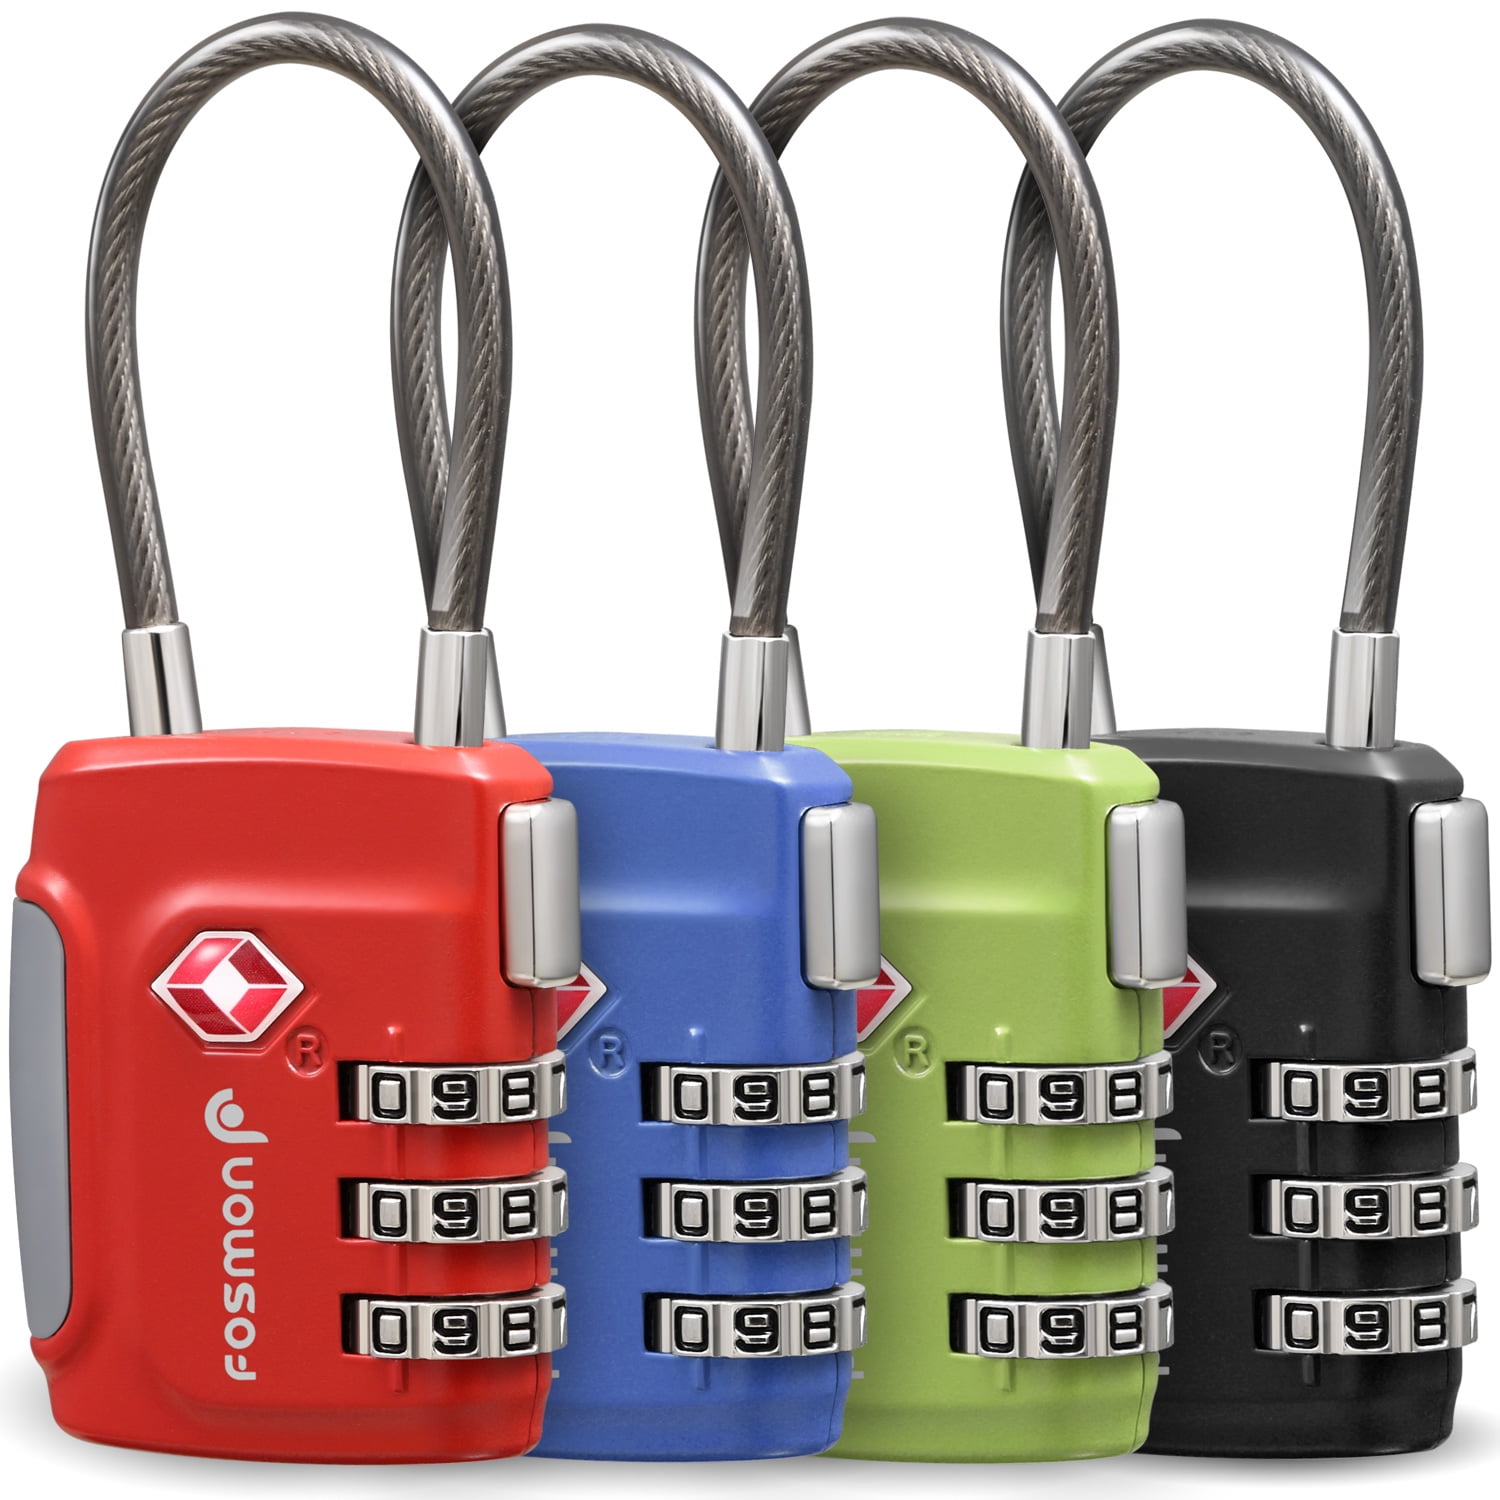 TSA Approved Alloy Travel Lock Luggage Bag Padlock for Suitcases & Baggage 